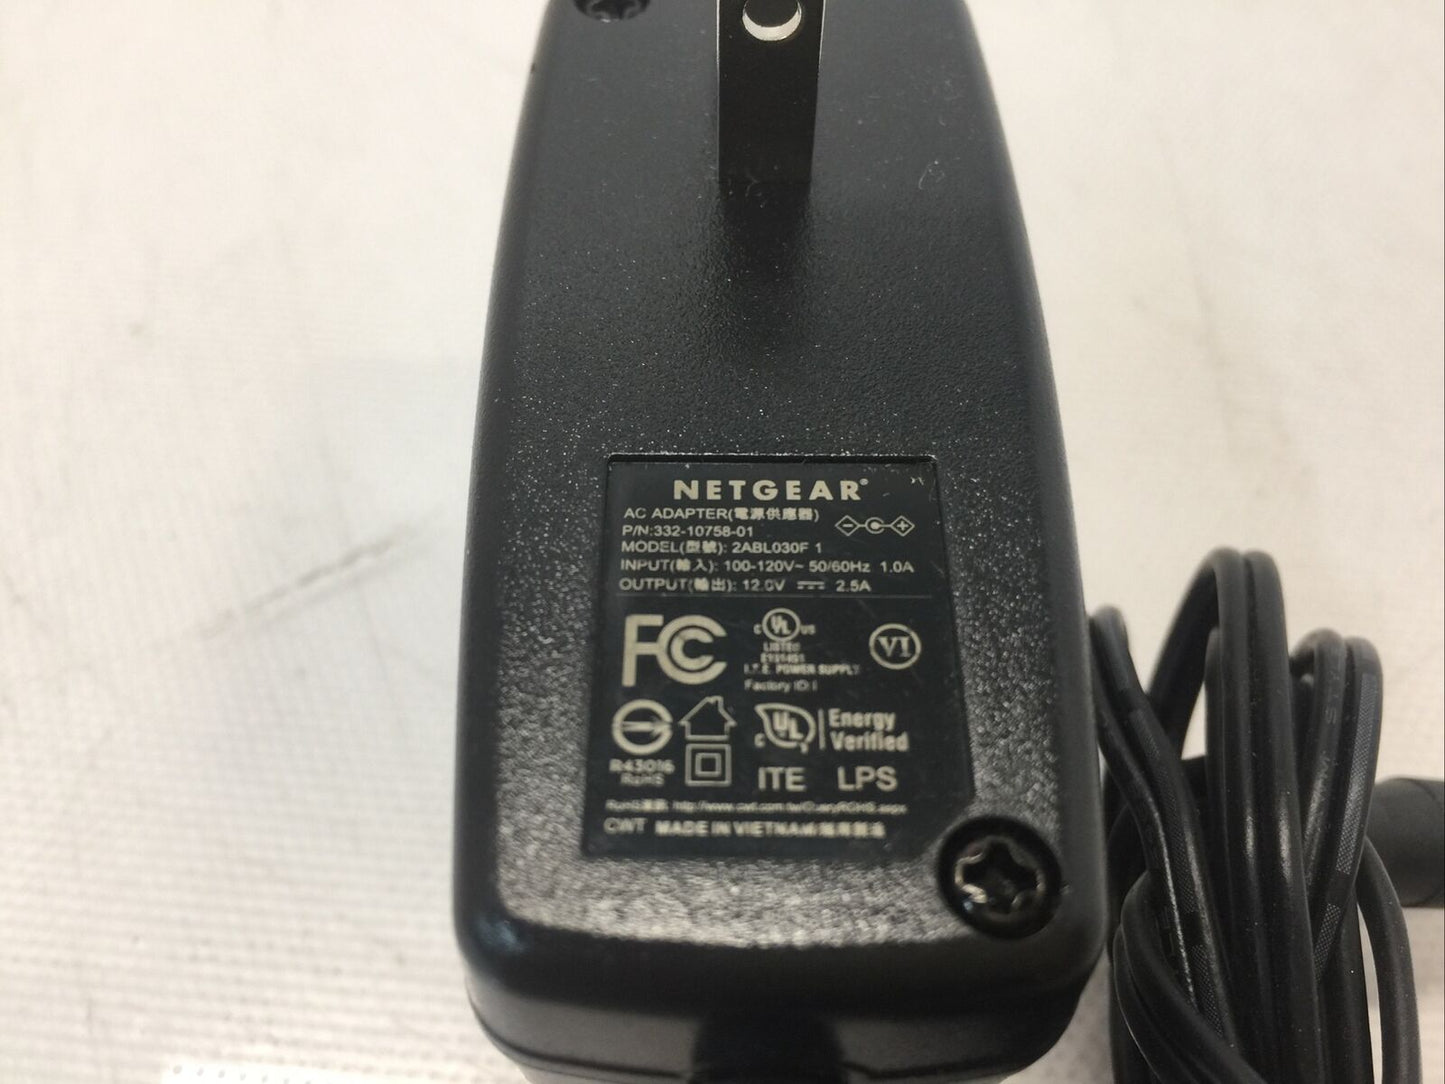 (10) Netgear 12V 2.5A AC Adapter 2ABL030F Power Supply 332-10758-01 Charger